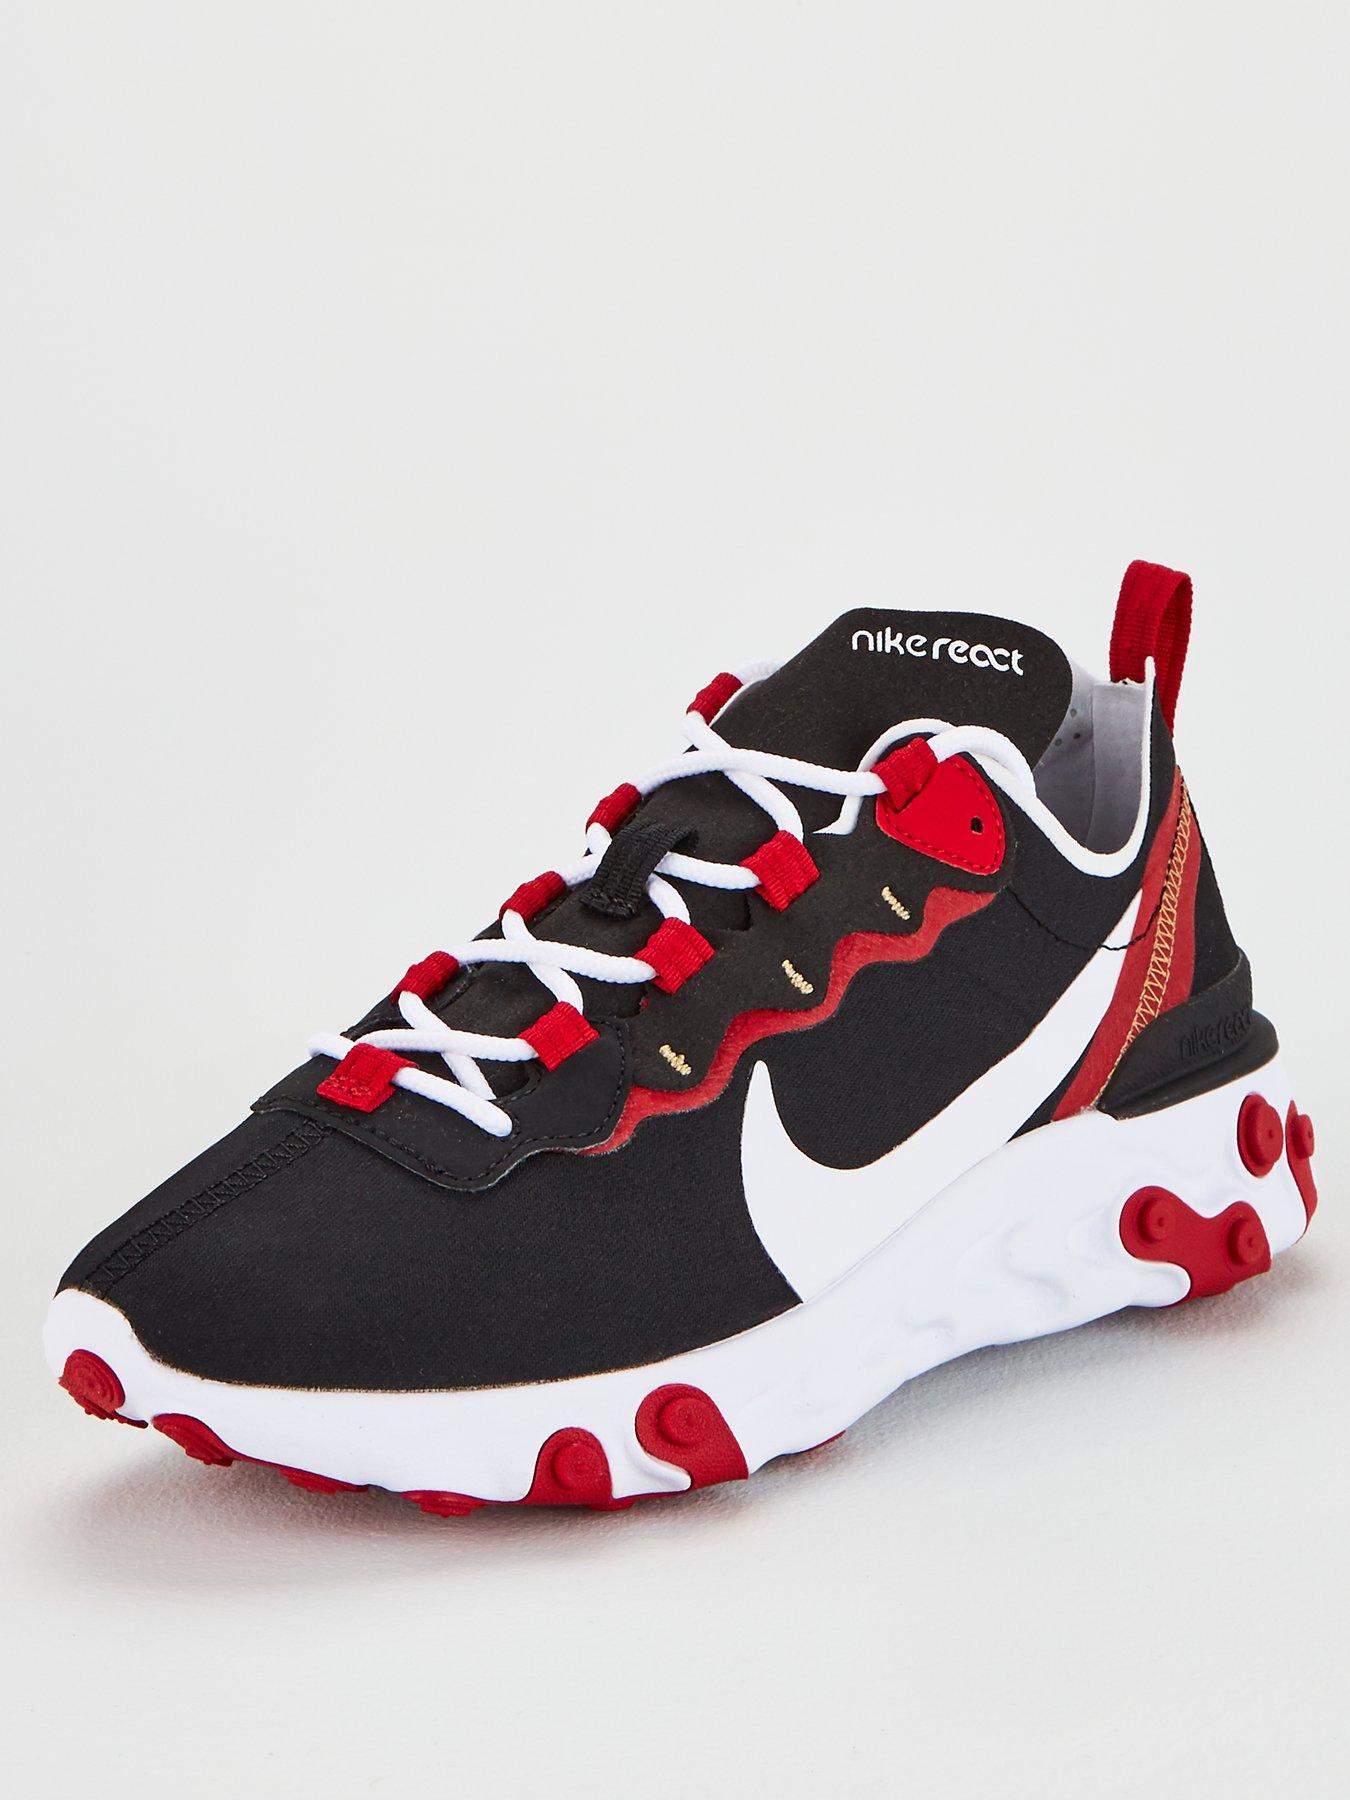 red and black nike react